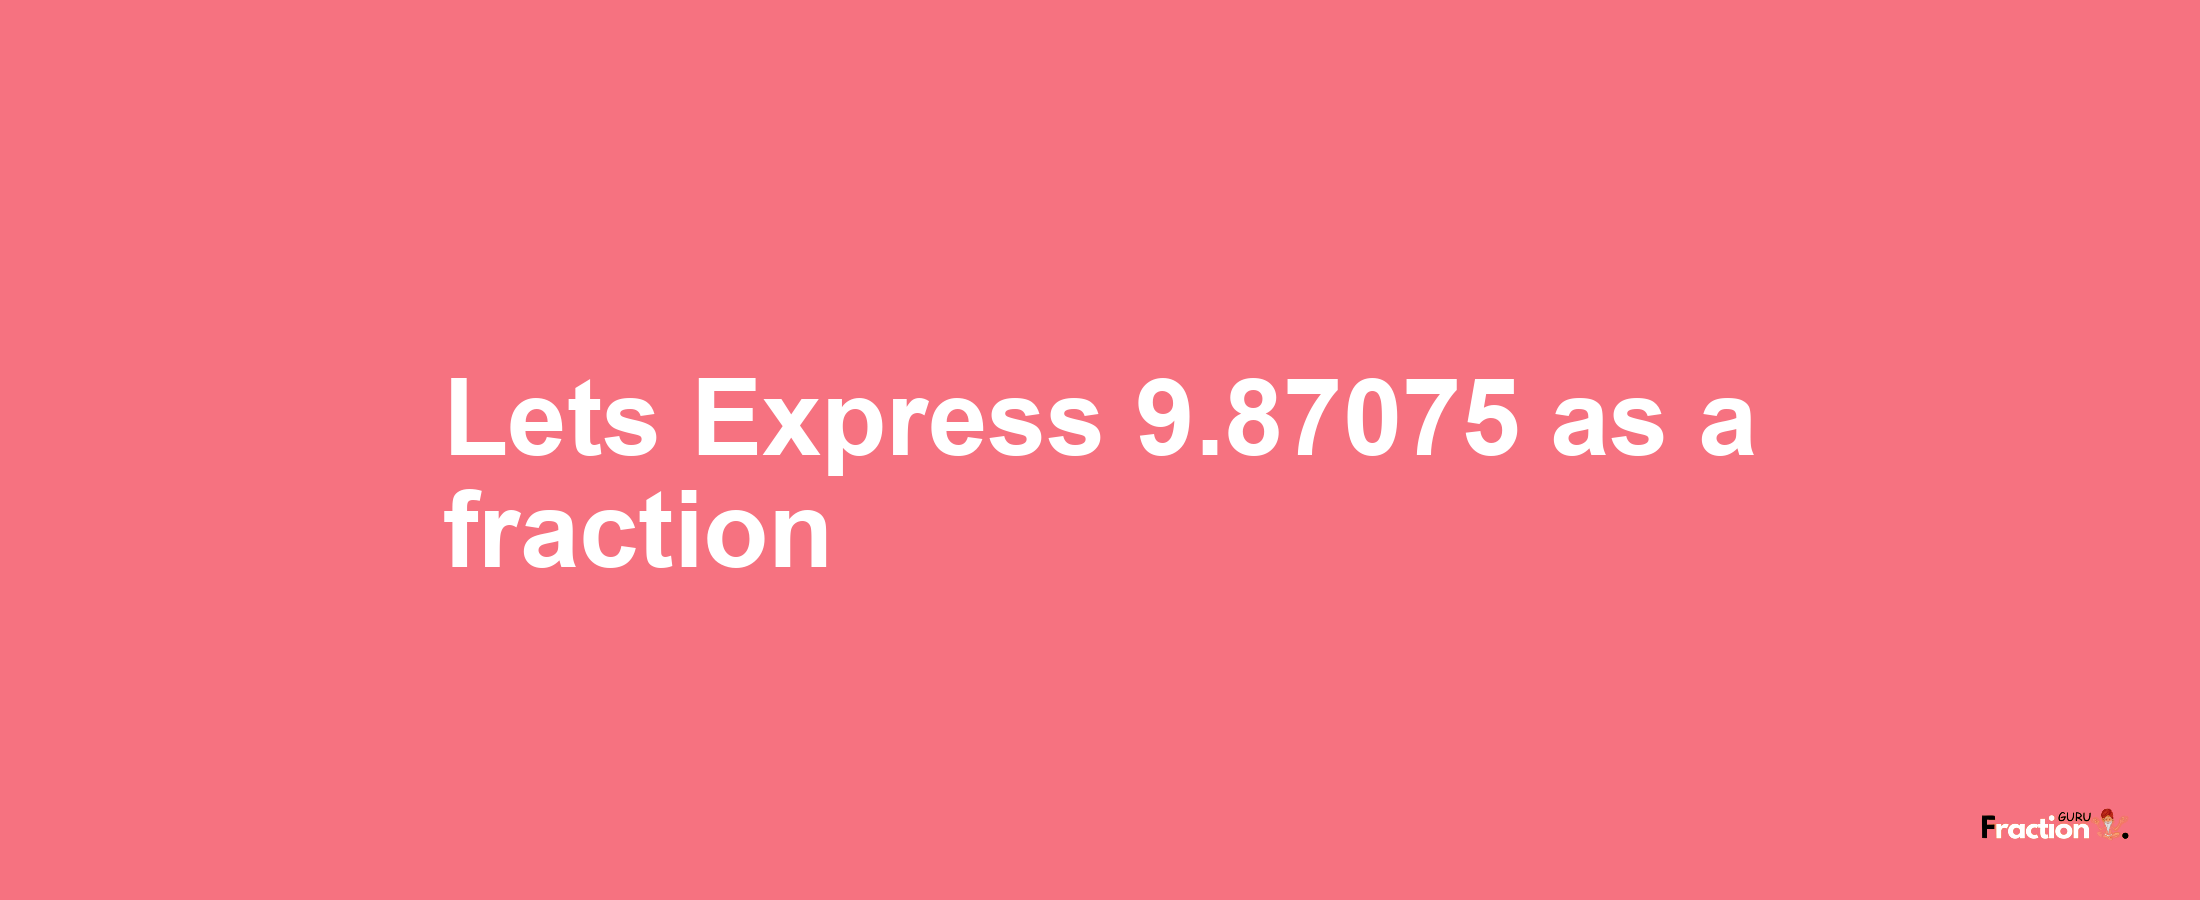 Lets Express 9.87075 as afraction